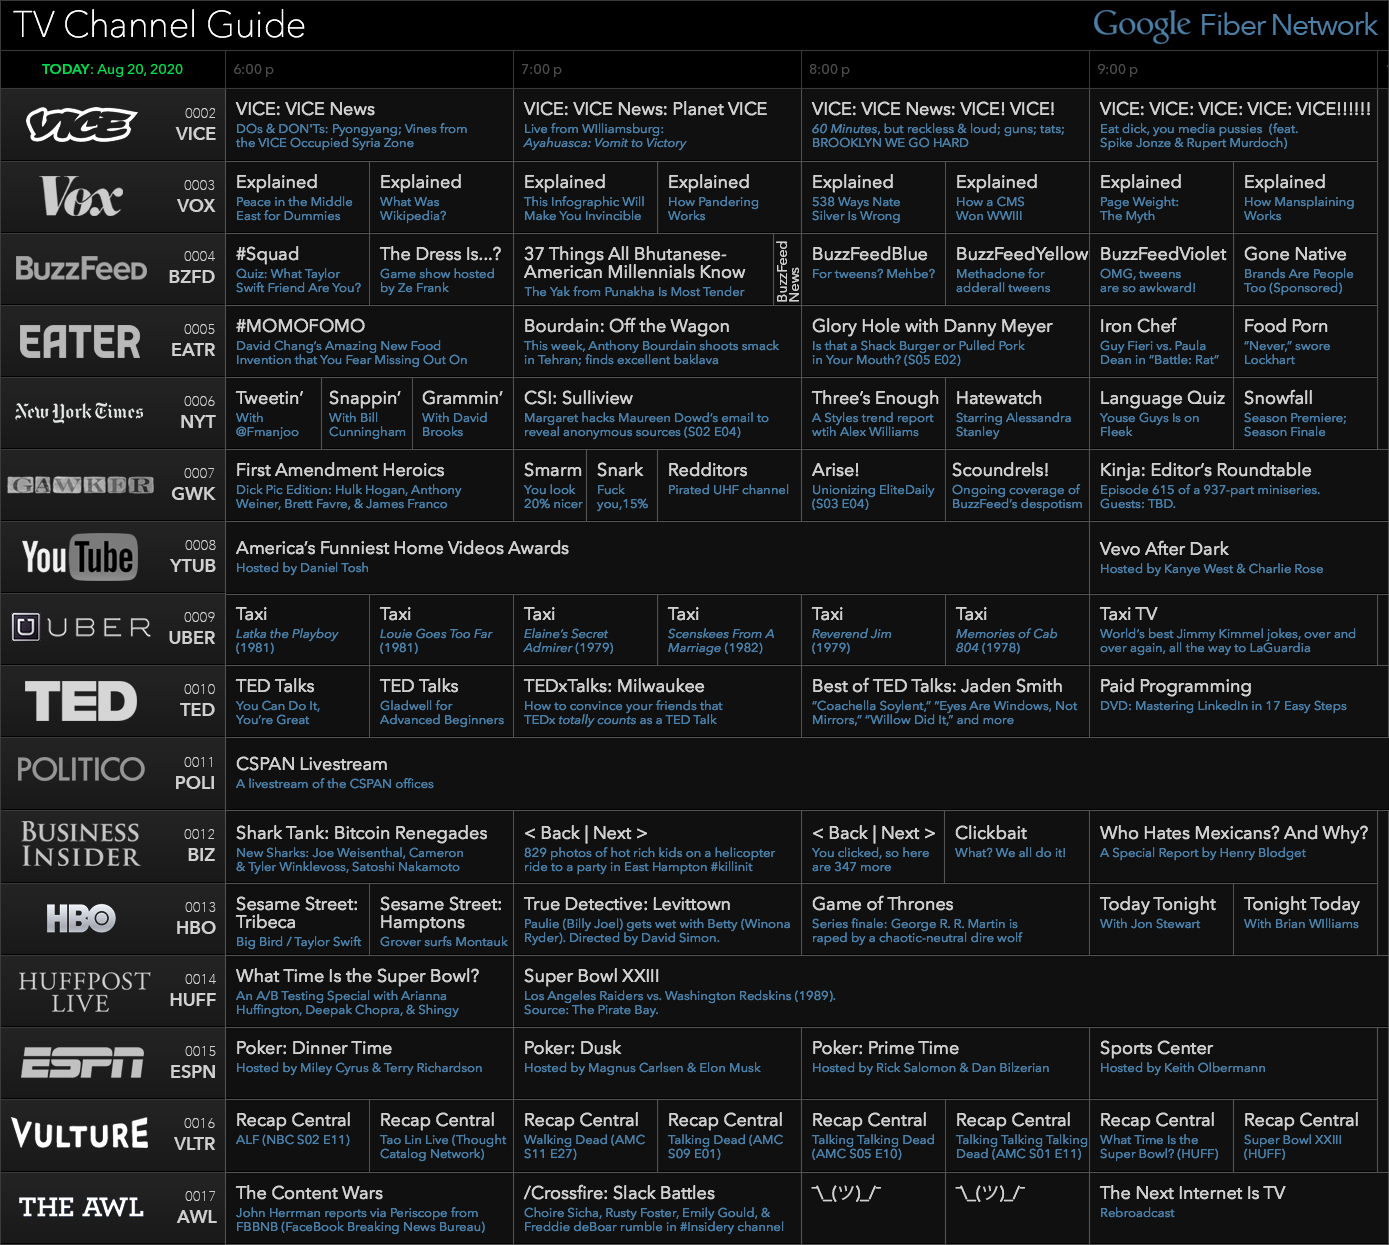 A Satirical View of What a TV Channel Guide Might Look Like the Near Future